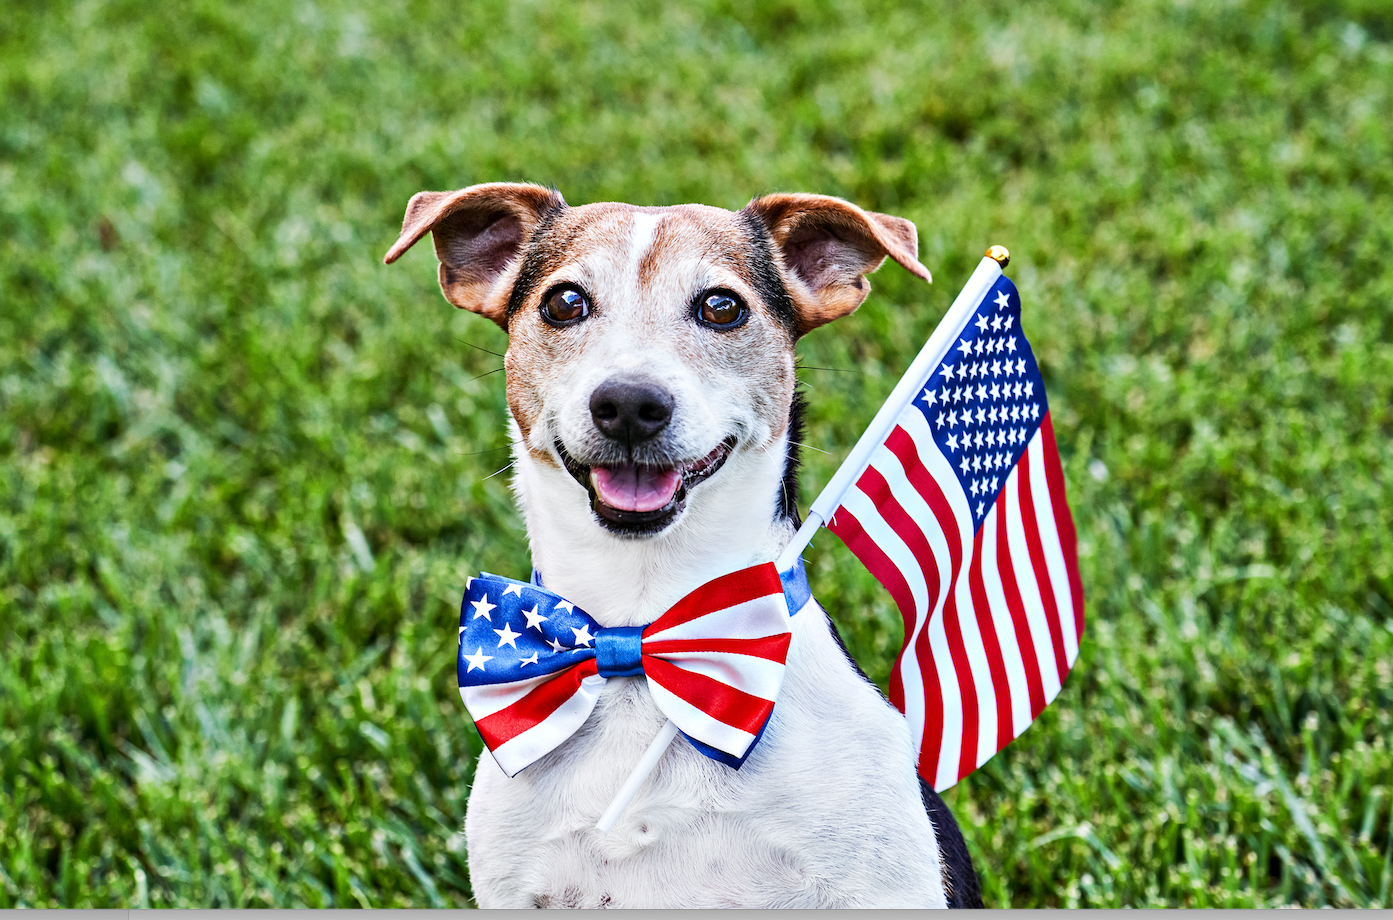 Dog with stars and stripes bow tie and flag